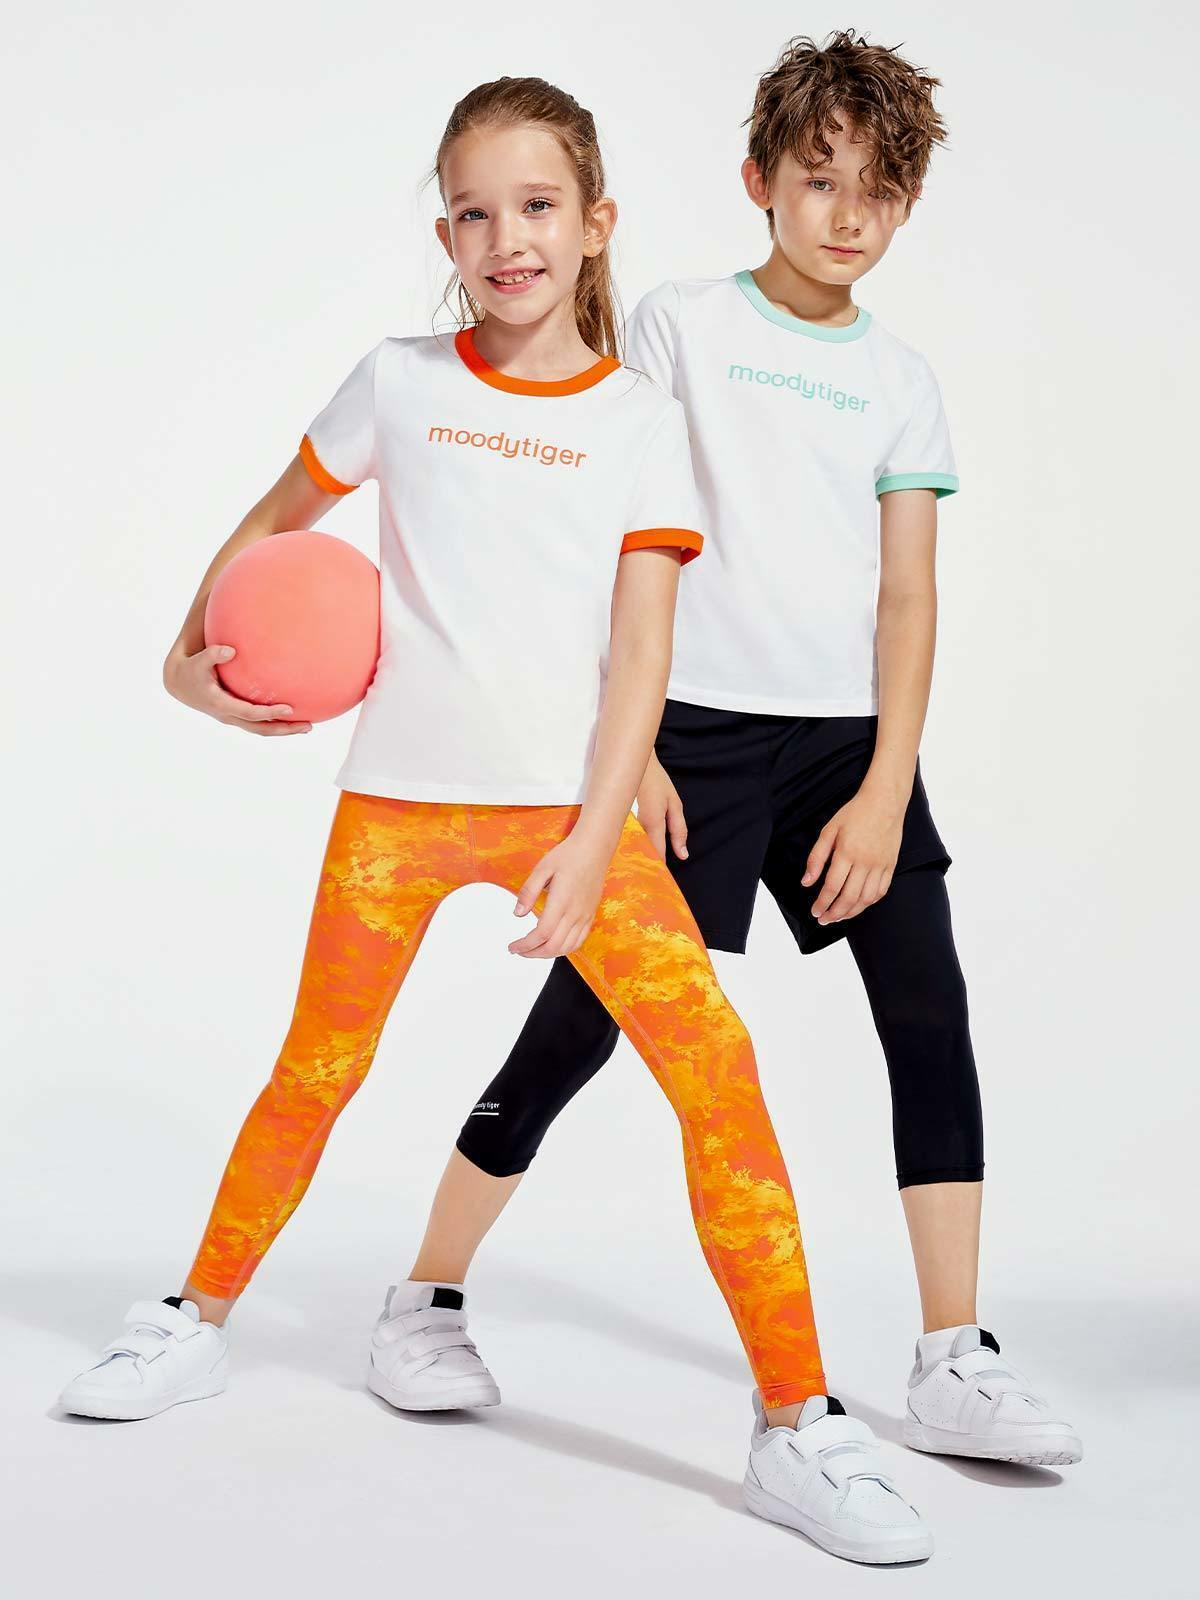 moodytiger Girls Soft Light and Comfortable Stretchy Cropped Leggings